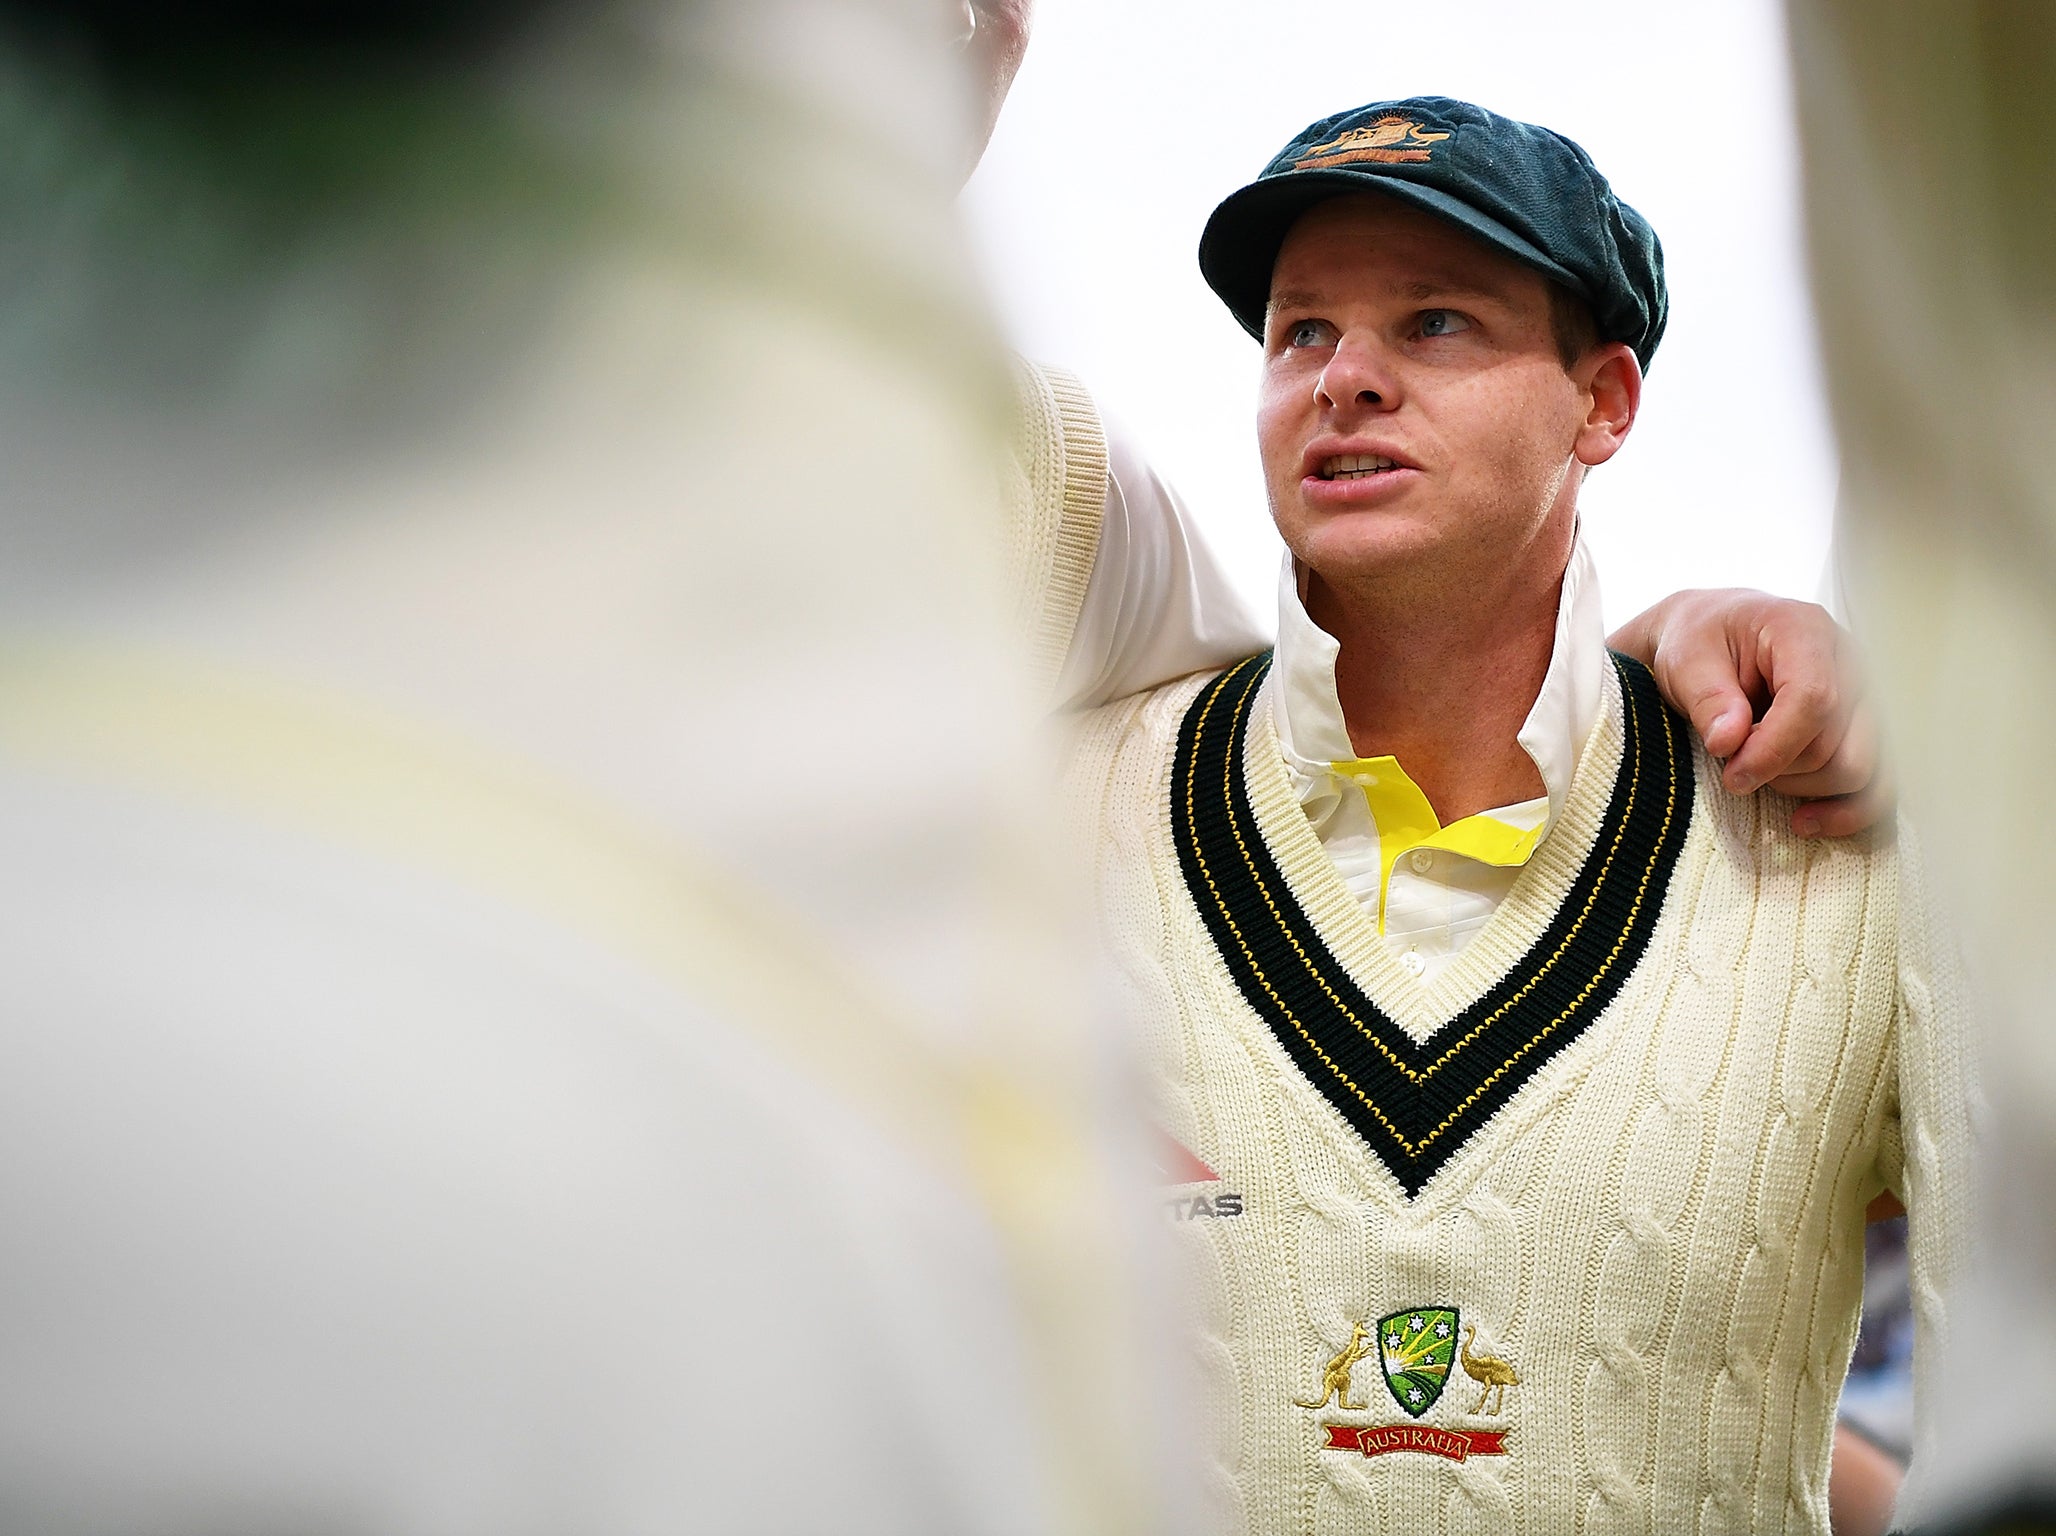 Steve Smith bats with ambition and audacity